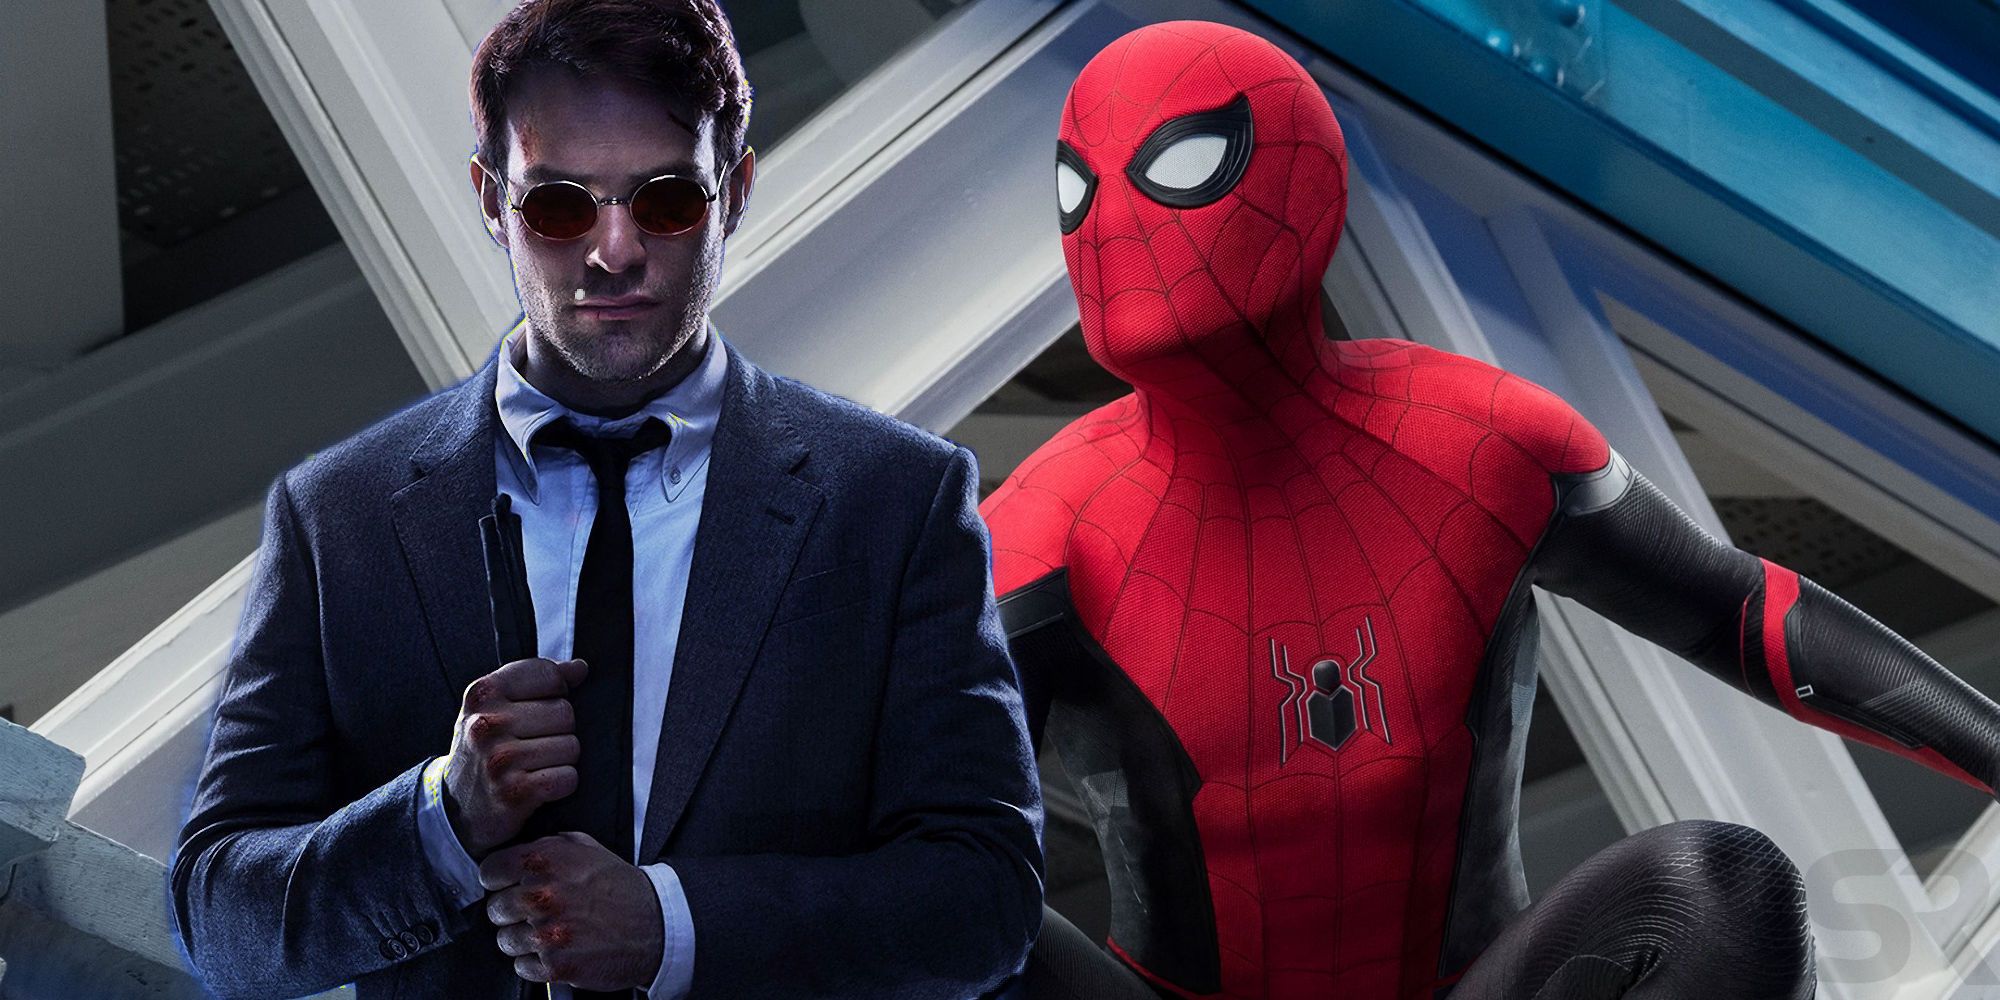 Blended image of Matt Murdock from Daredevil Netflix series and Spider-Man from MCU.